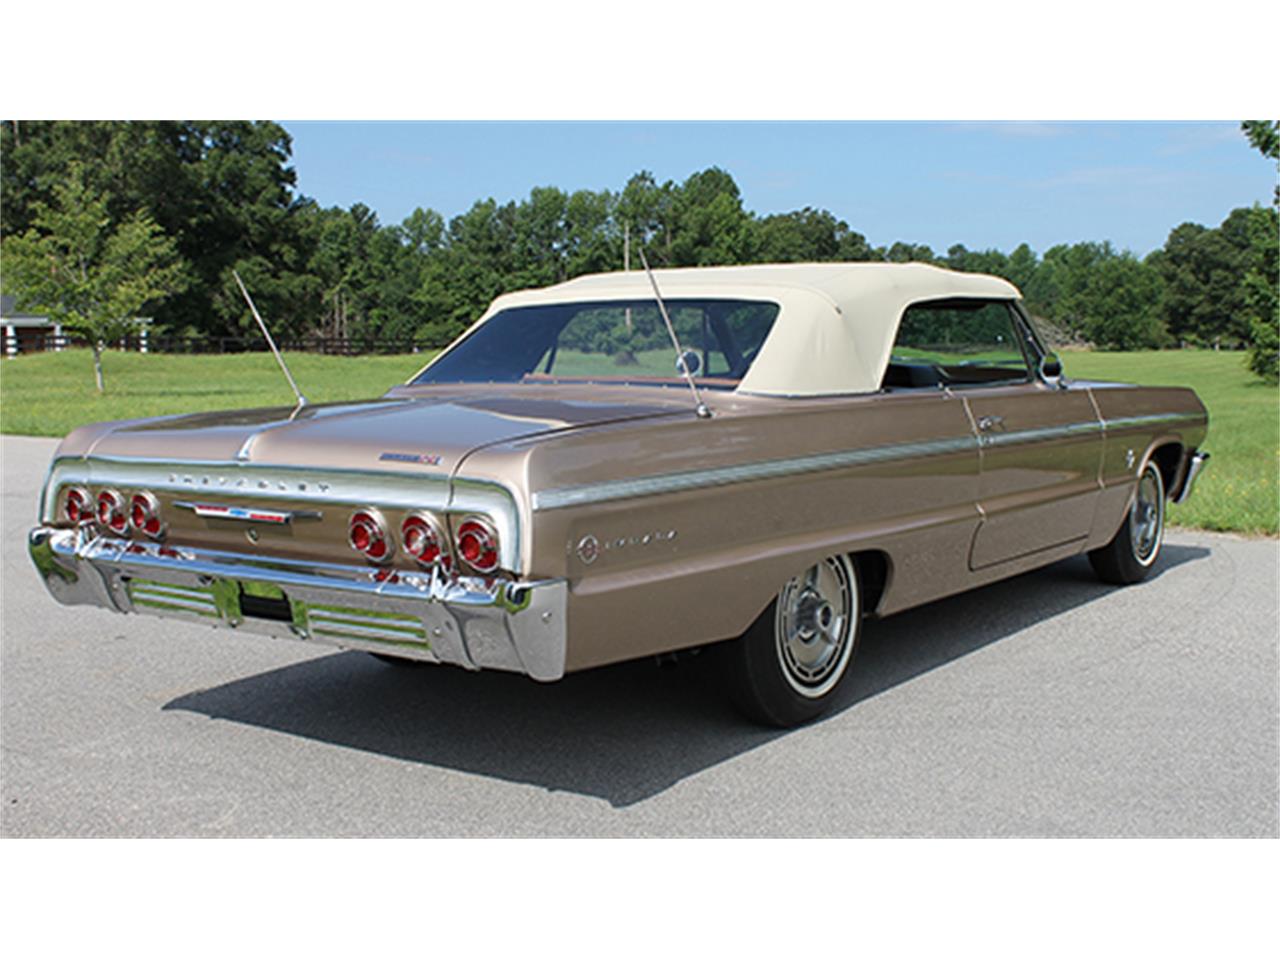 1964 Chevrolet Impala SS 409 Convertible for Sale | ClassicCars.com ...